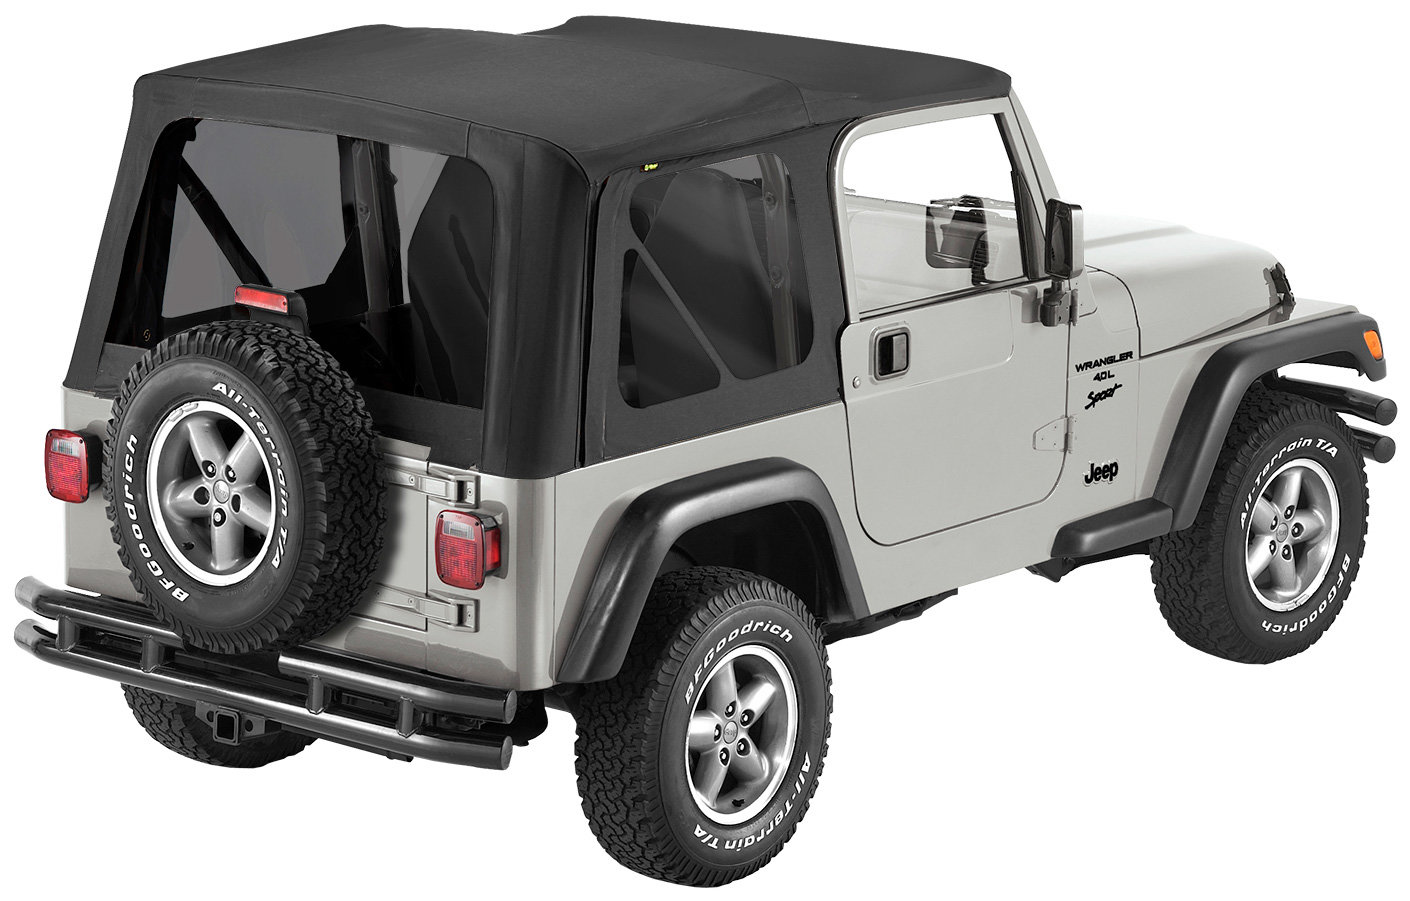 Bestop 79139-01 Sailcloth Replace-a-top Soft Top with Tinted Windows in  Black Denim for 97-06 Jeep Wrangler TJ | Quadratec